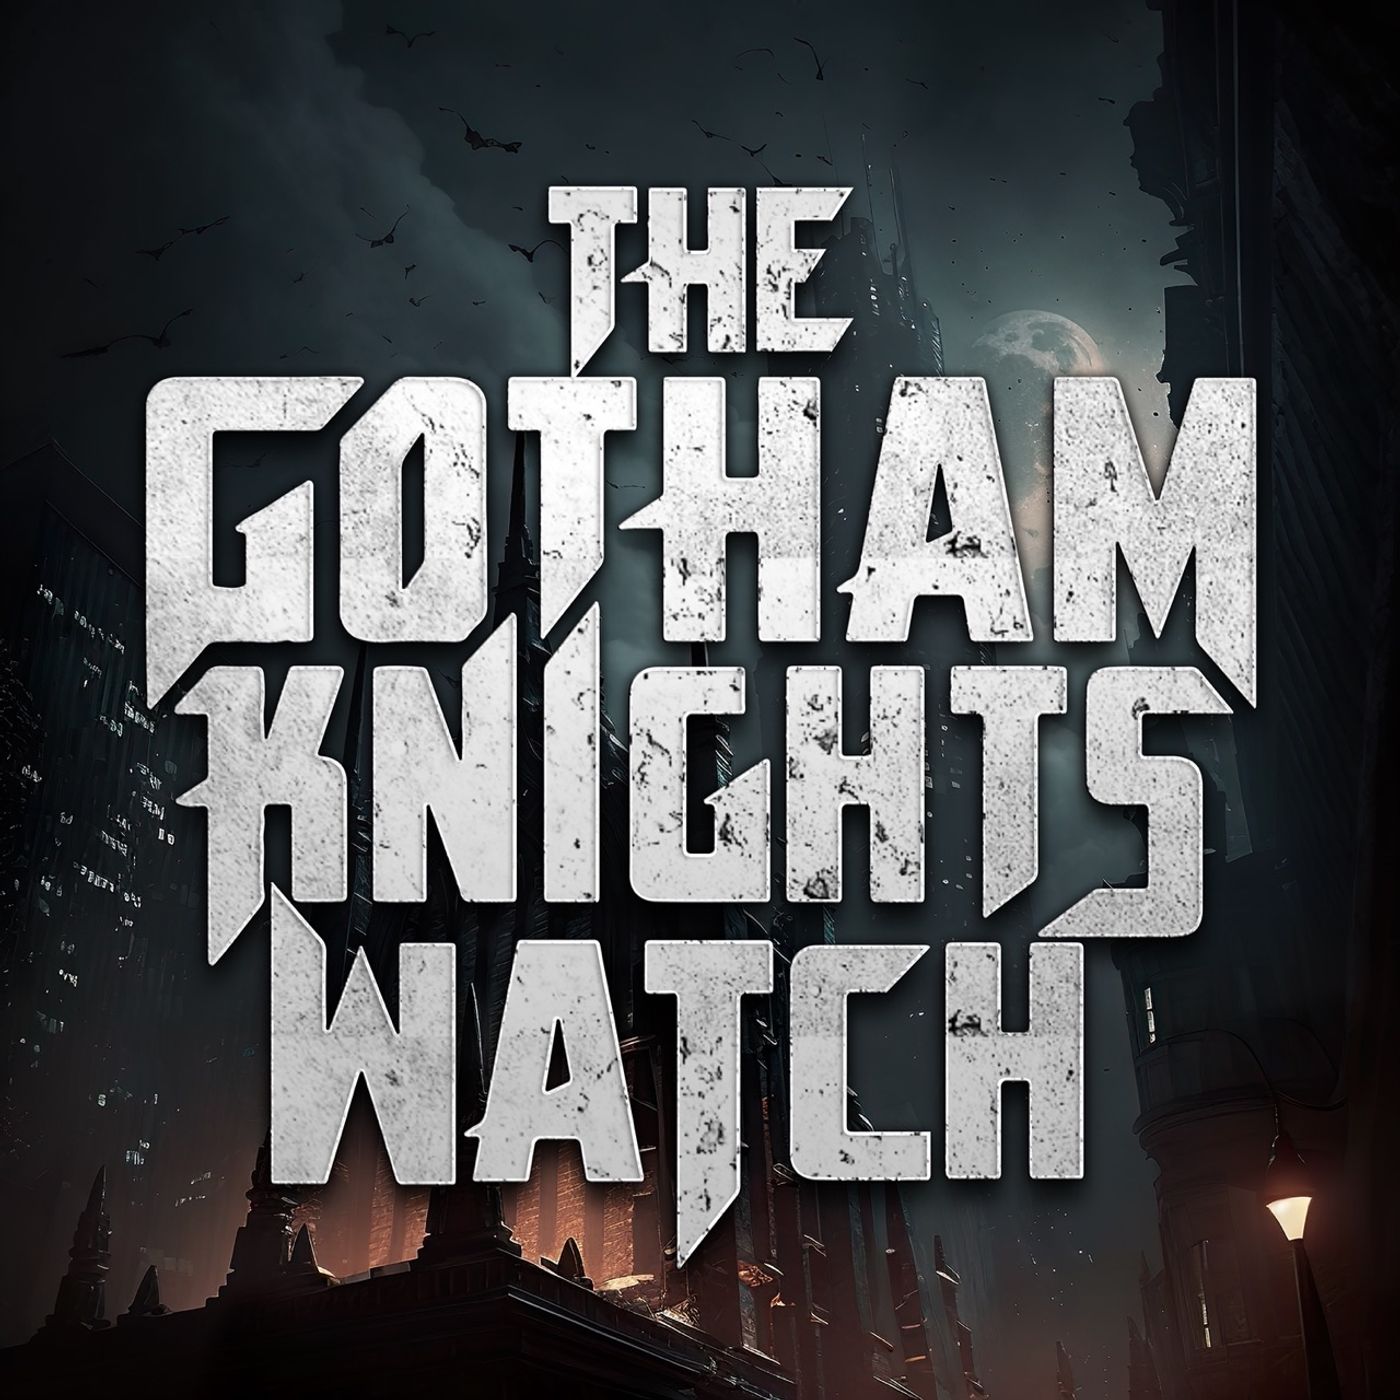 Gotham Knights' Episode 10 Recap & Ending, Explained: Did Brody